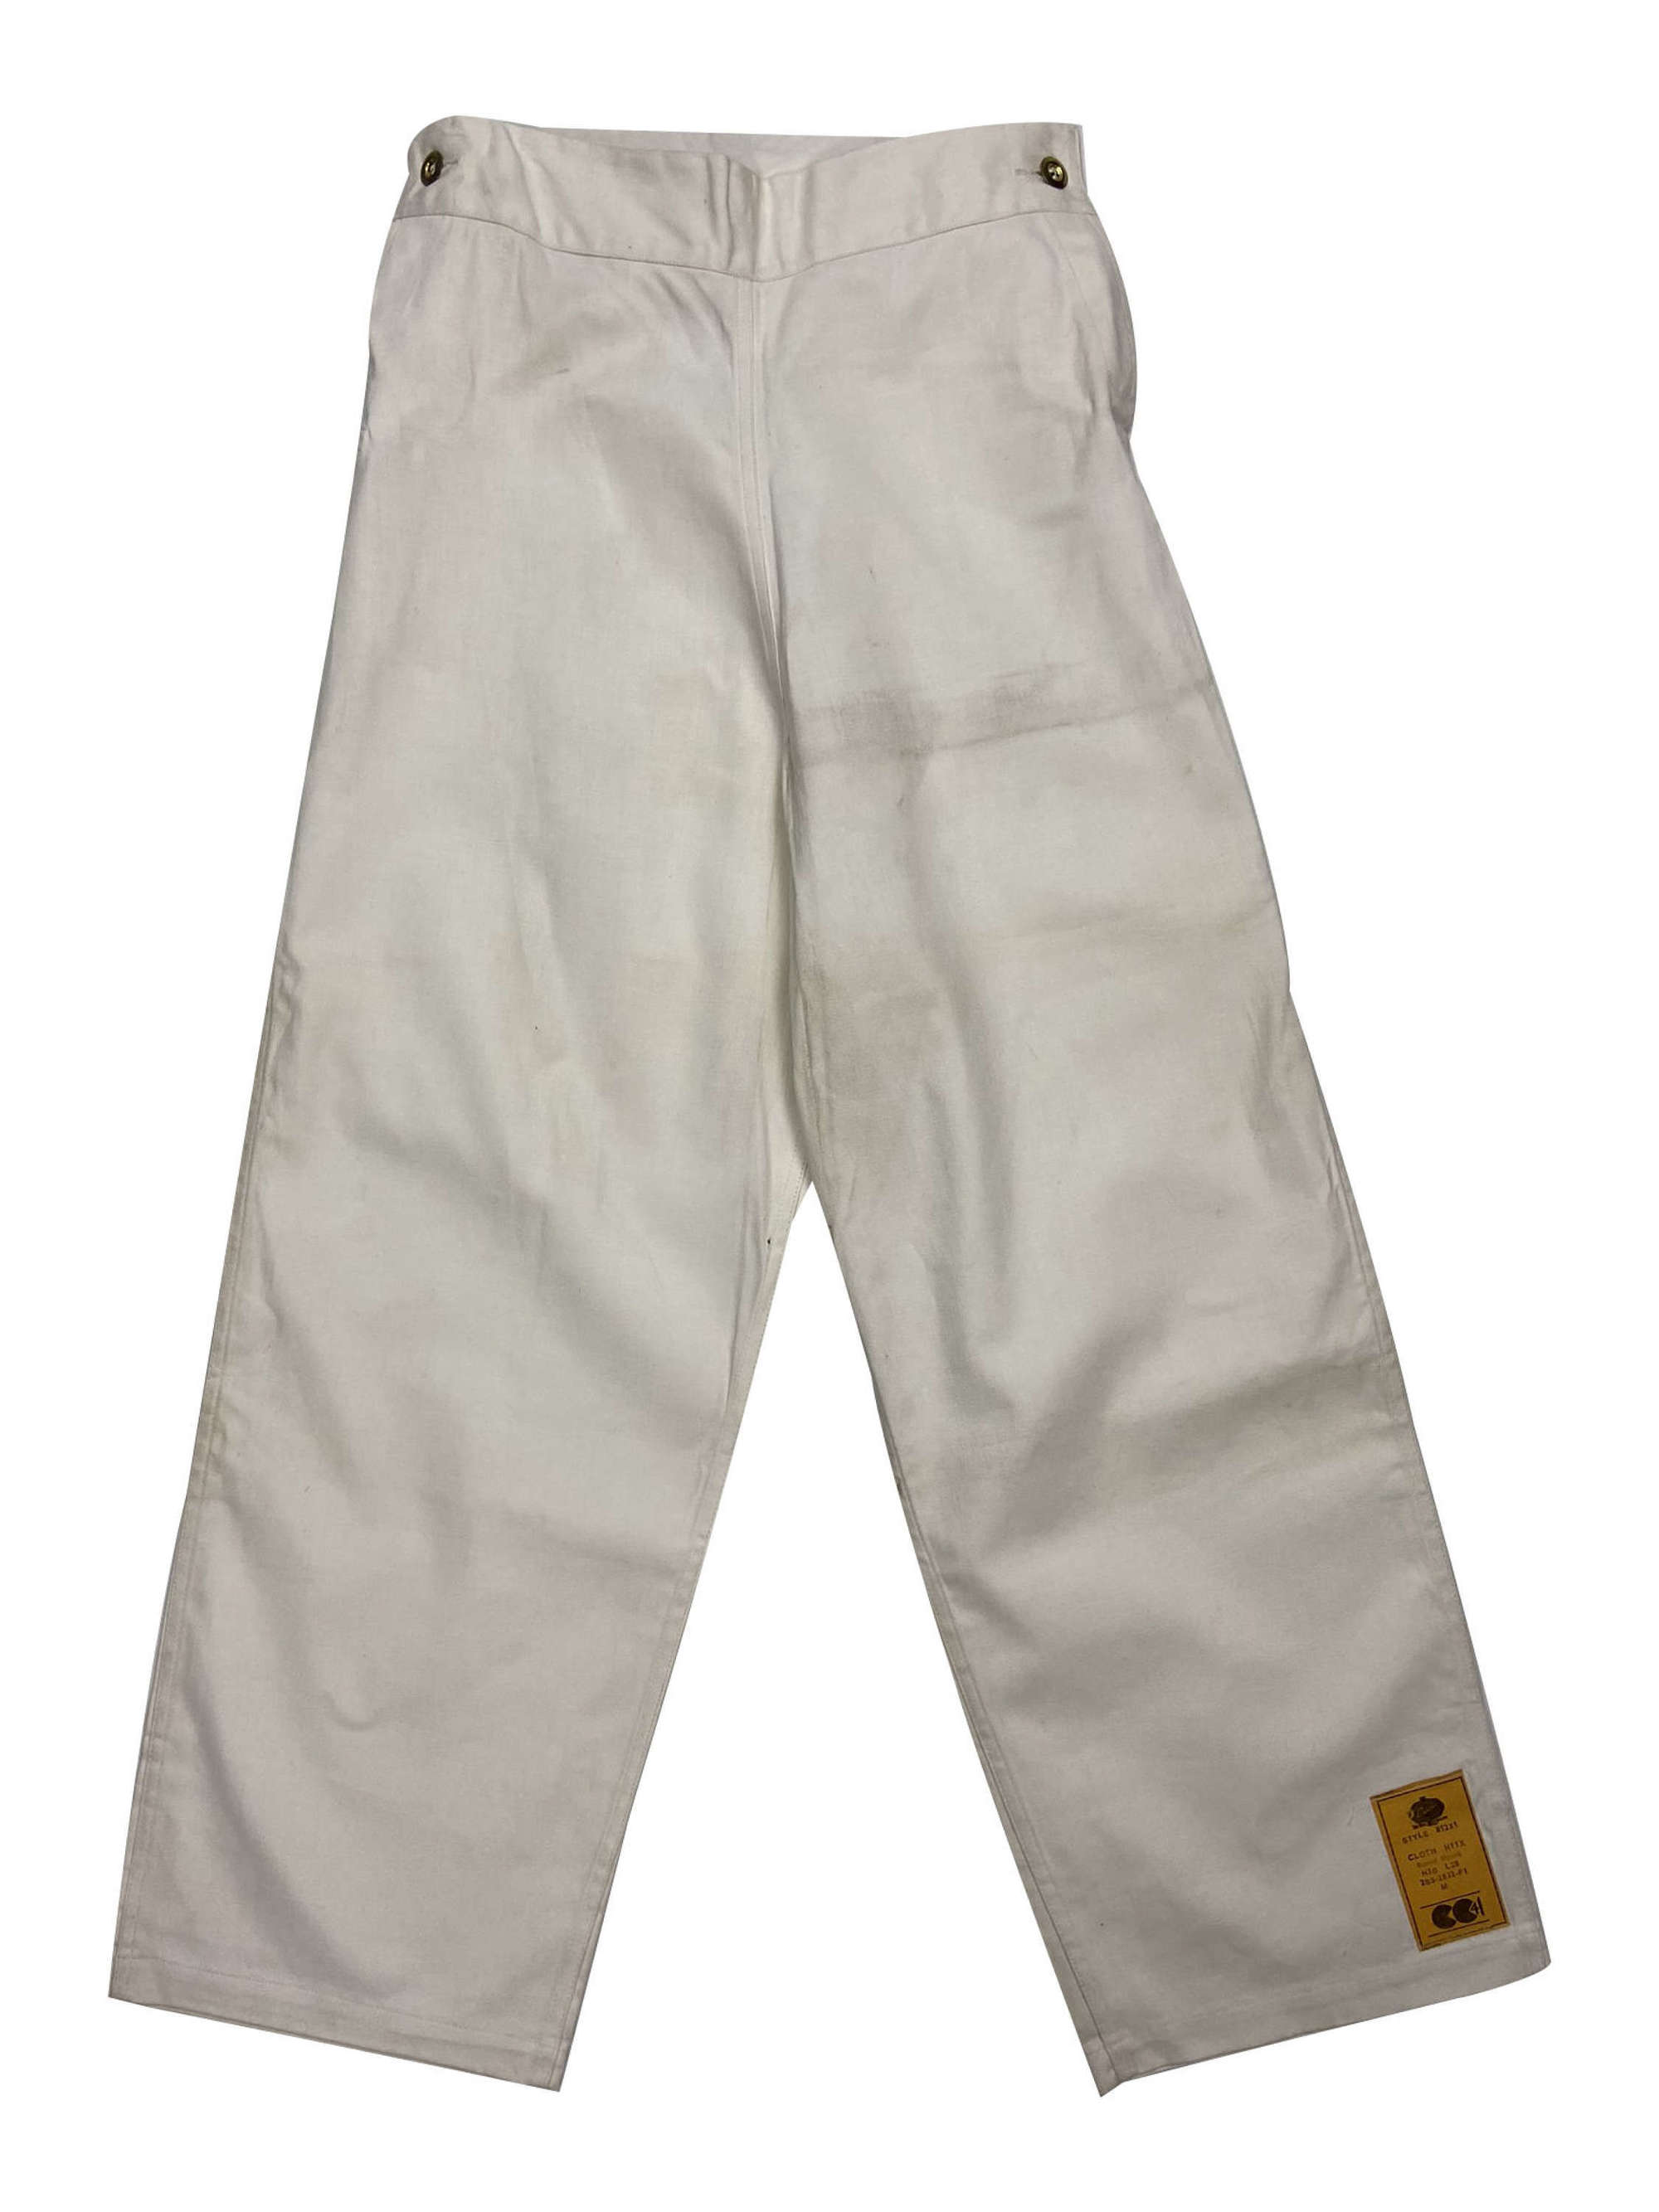 Original CC41 Royal Navy Cotton Drill Work Trousers by 'Digby Morton'